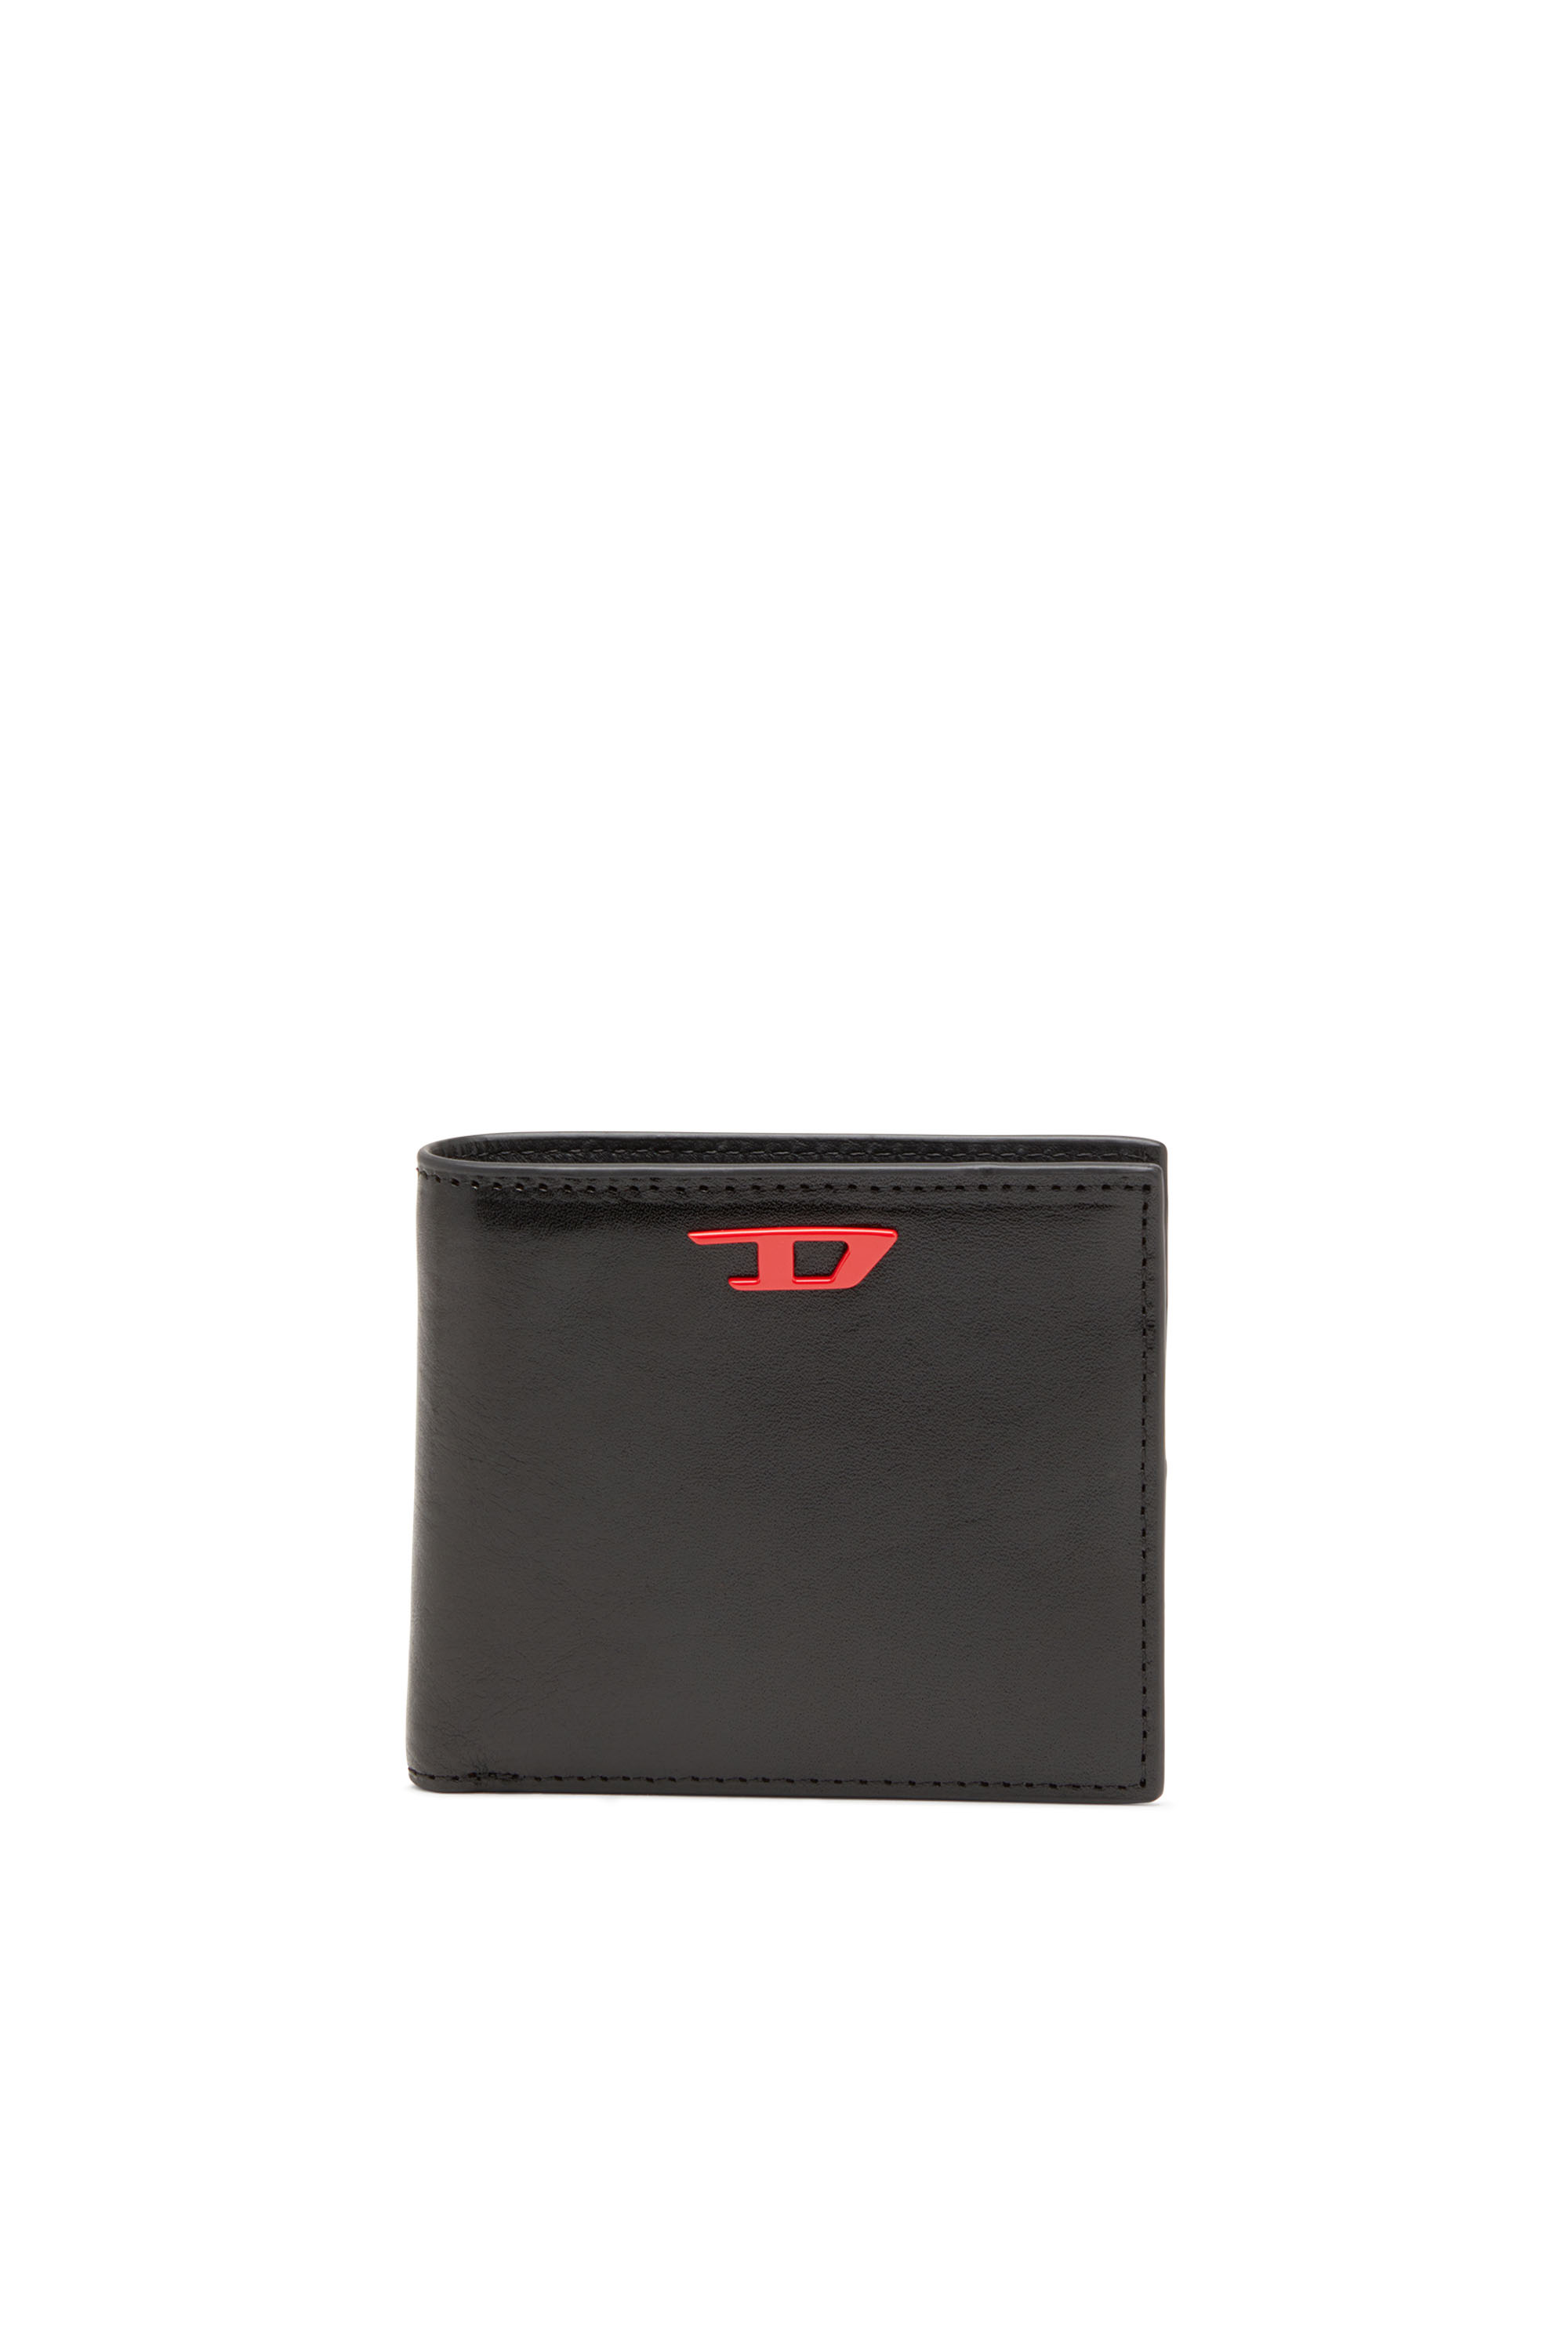 Diesel - RAVE BI-FOLD COIN S, Man Leather bi-fold wallet with red D plaque in Black - Image 1